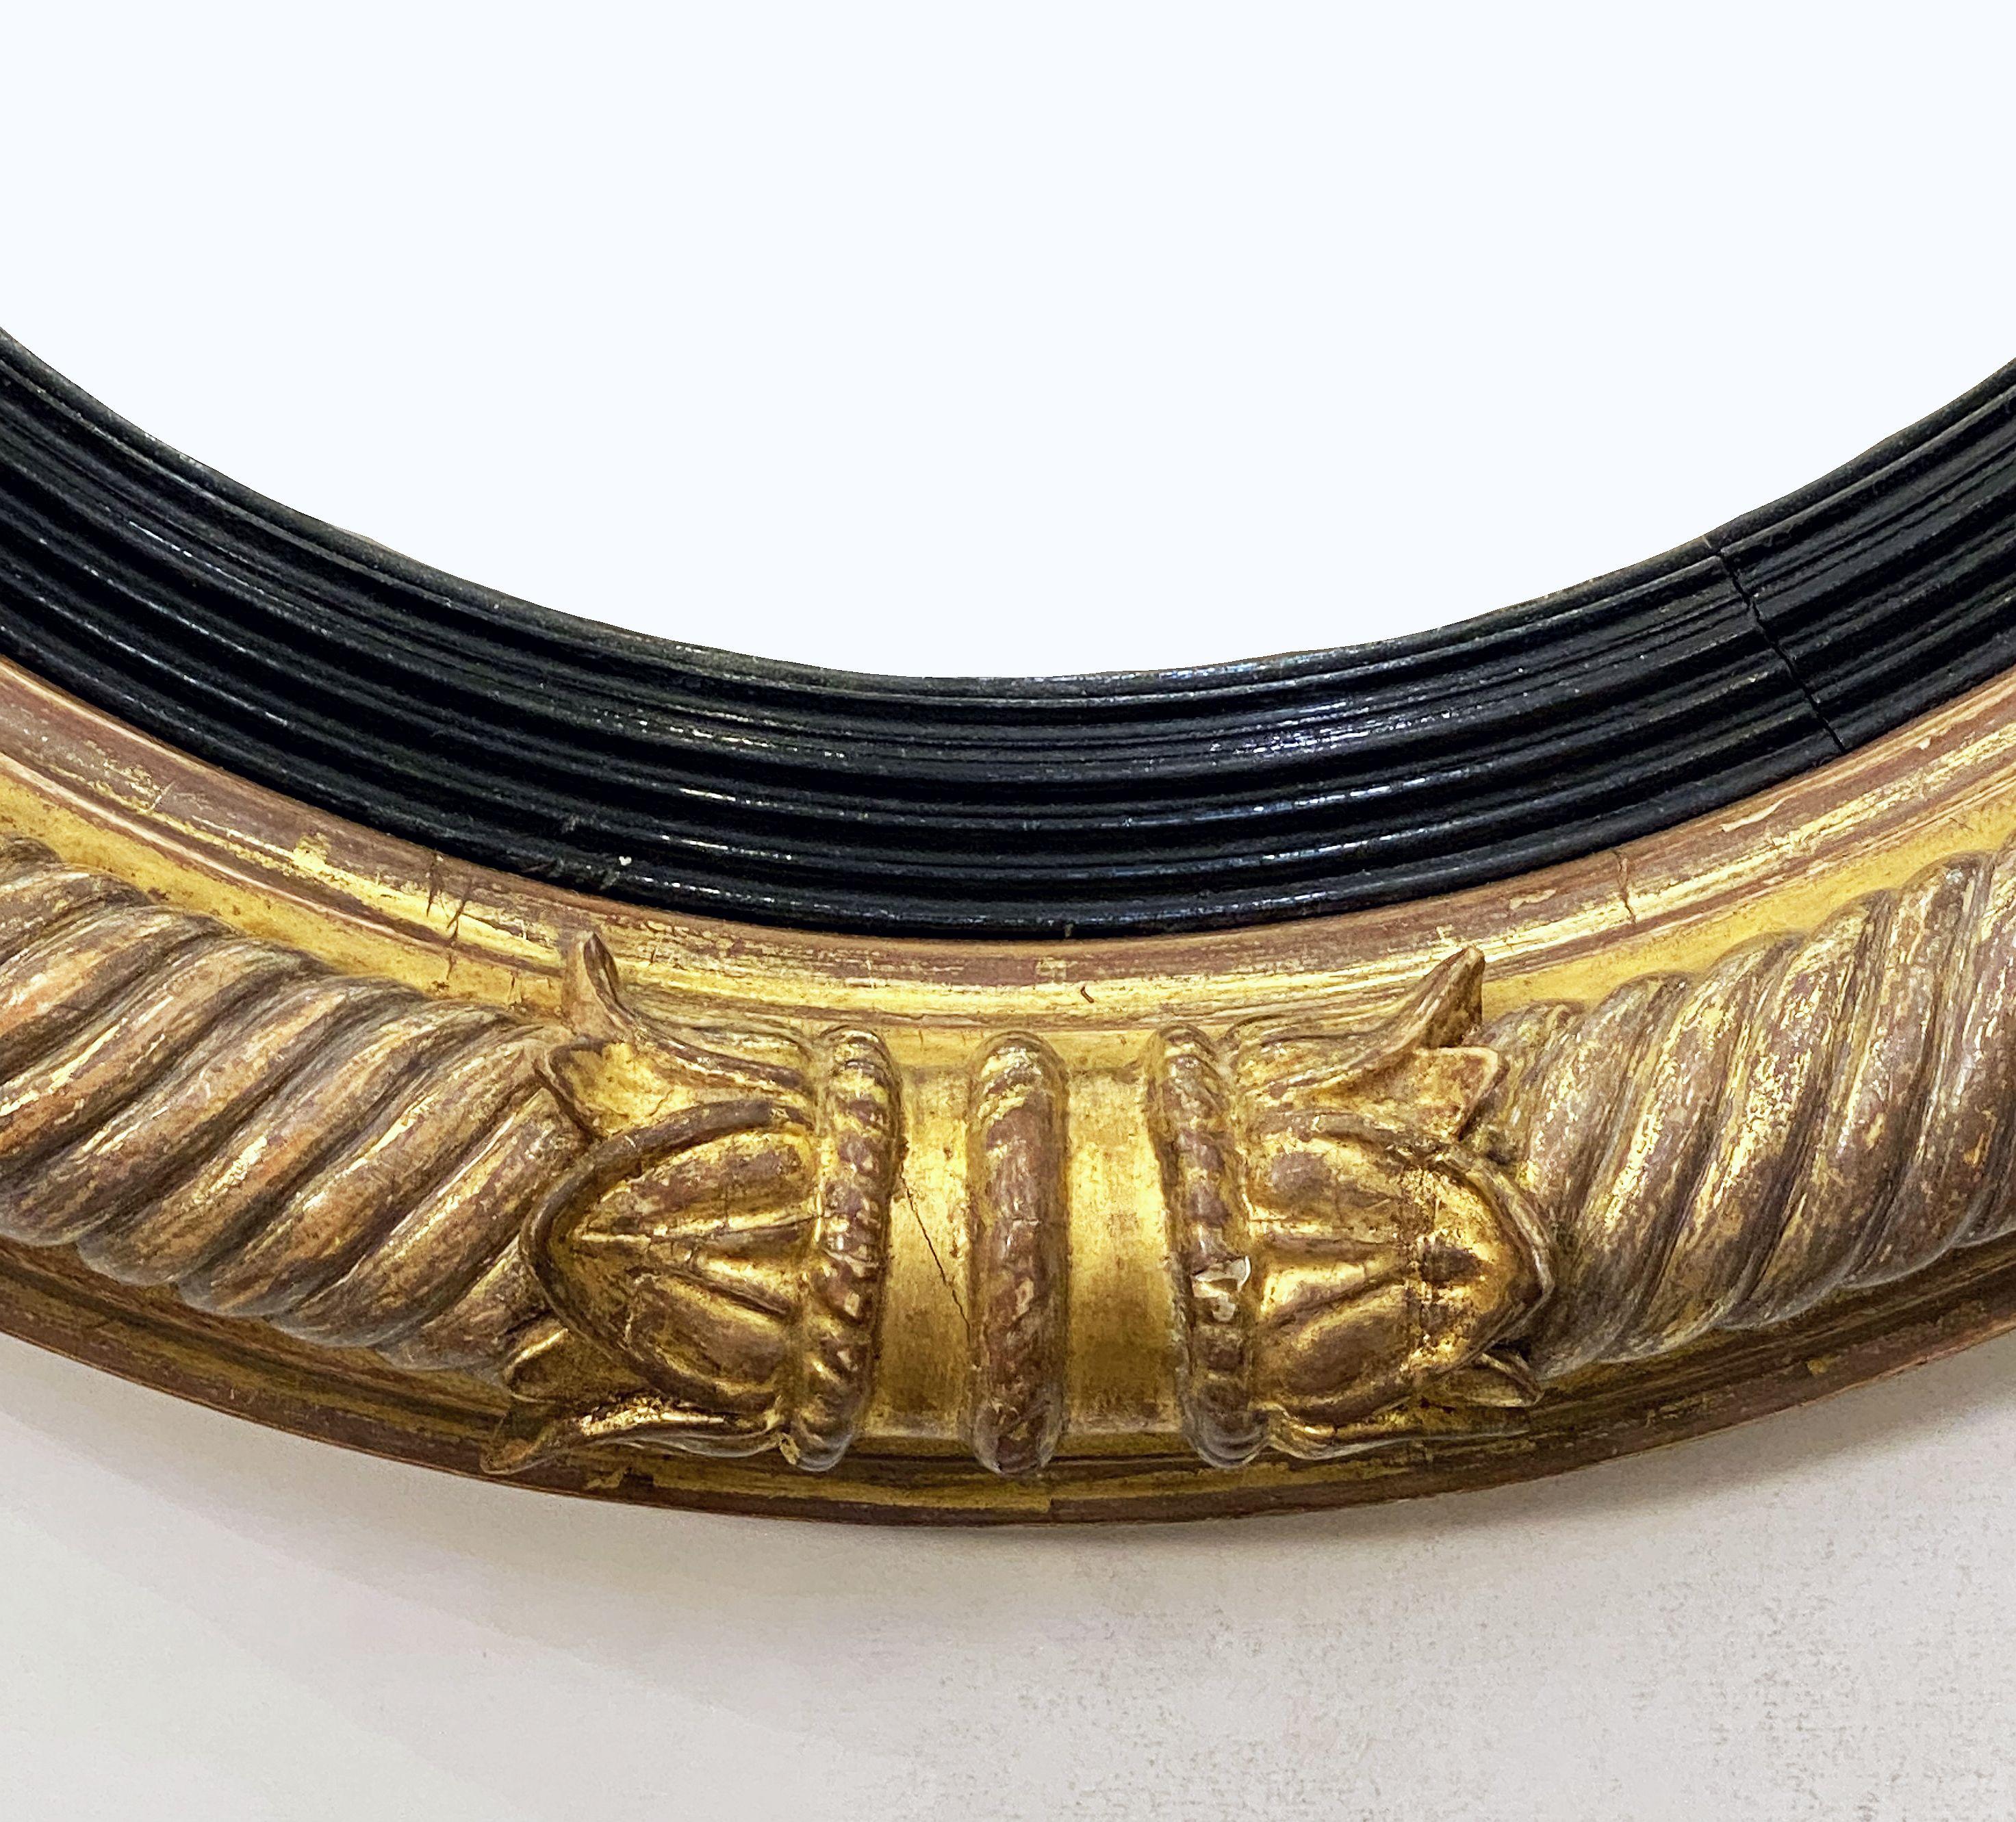 English Gilt and Ebony Convex Mirror from the Regency Era (Diameter 21 1/4) For Sale 3